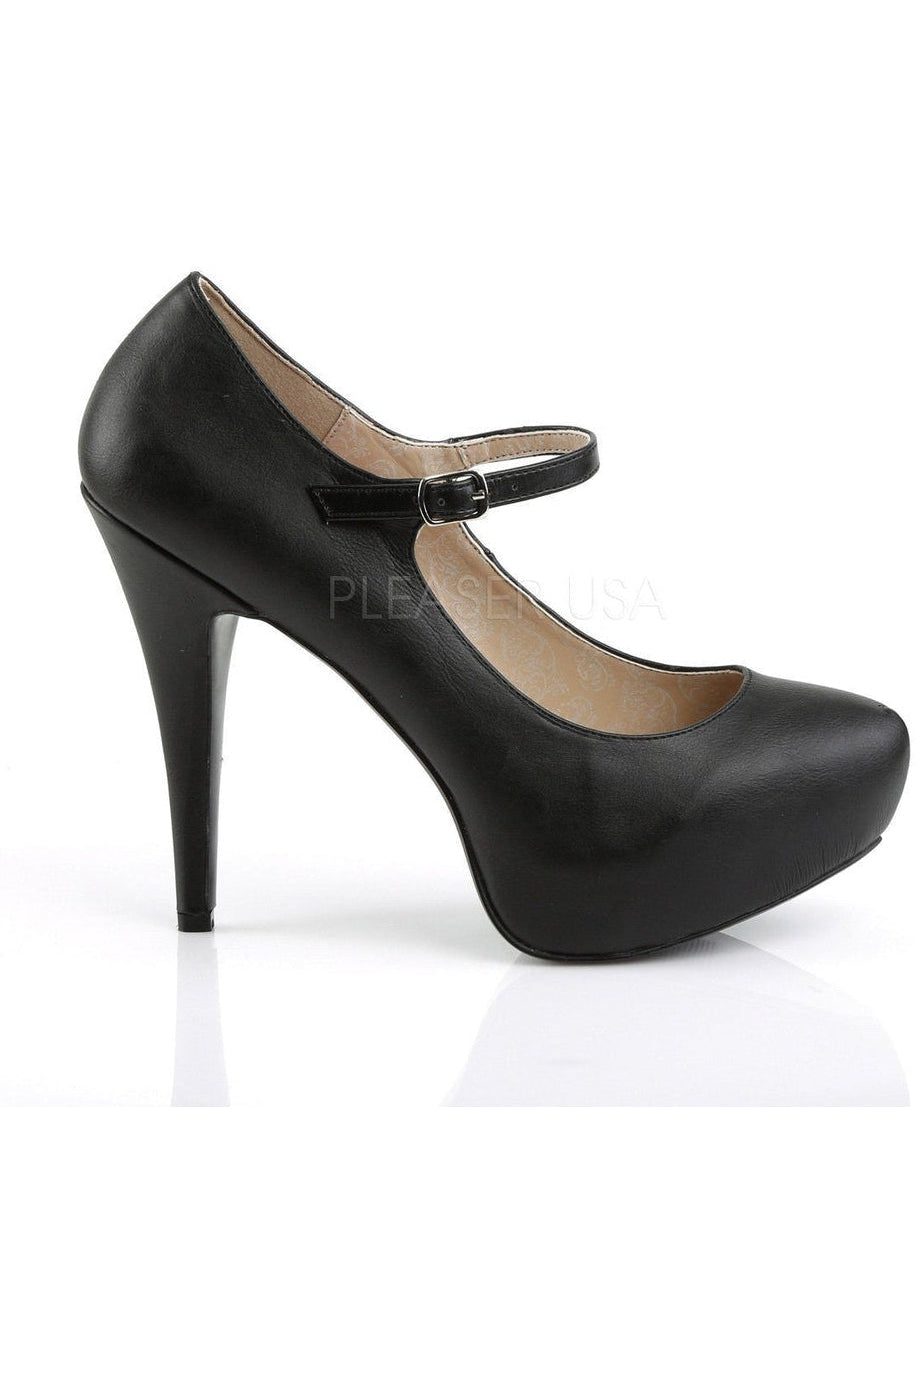 CHLOE-02 Pump | Black Faux Leather-Pleaser Pink Label-Mary Janes-SEXYSHOES.COM